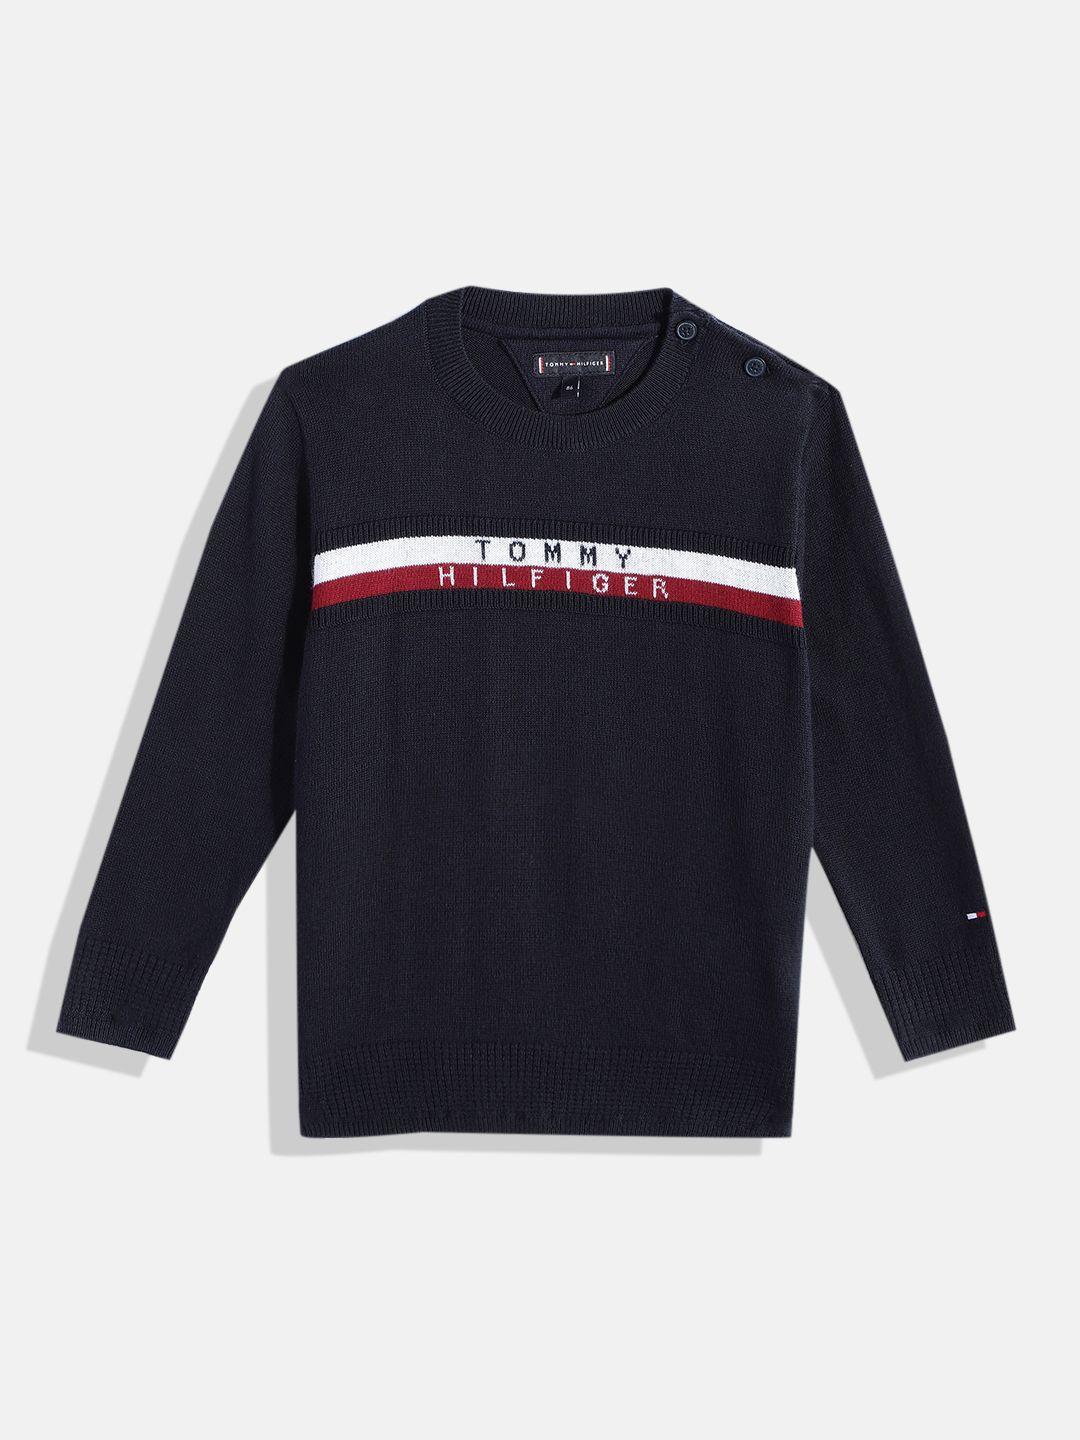 tommy hilfiger boys brand logo pure cotton pullover sweater